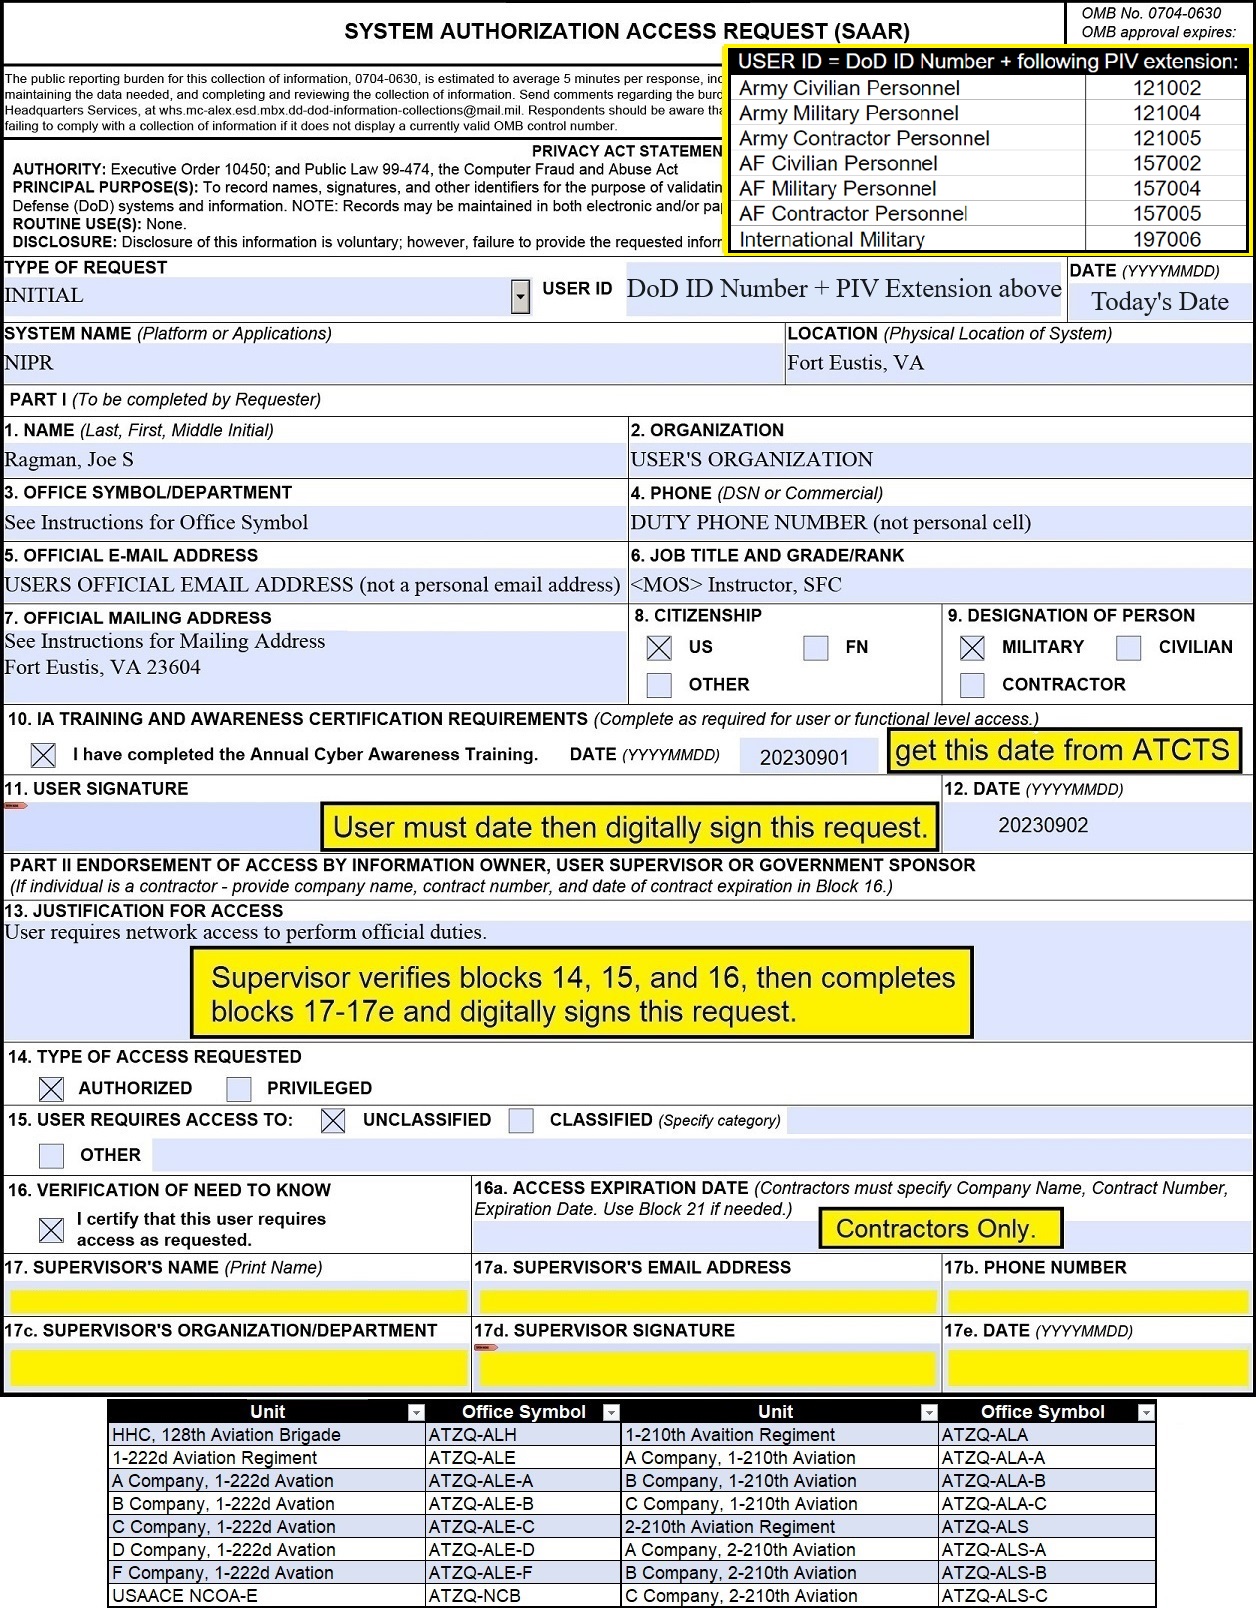 image of completed DD Form 2875